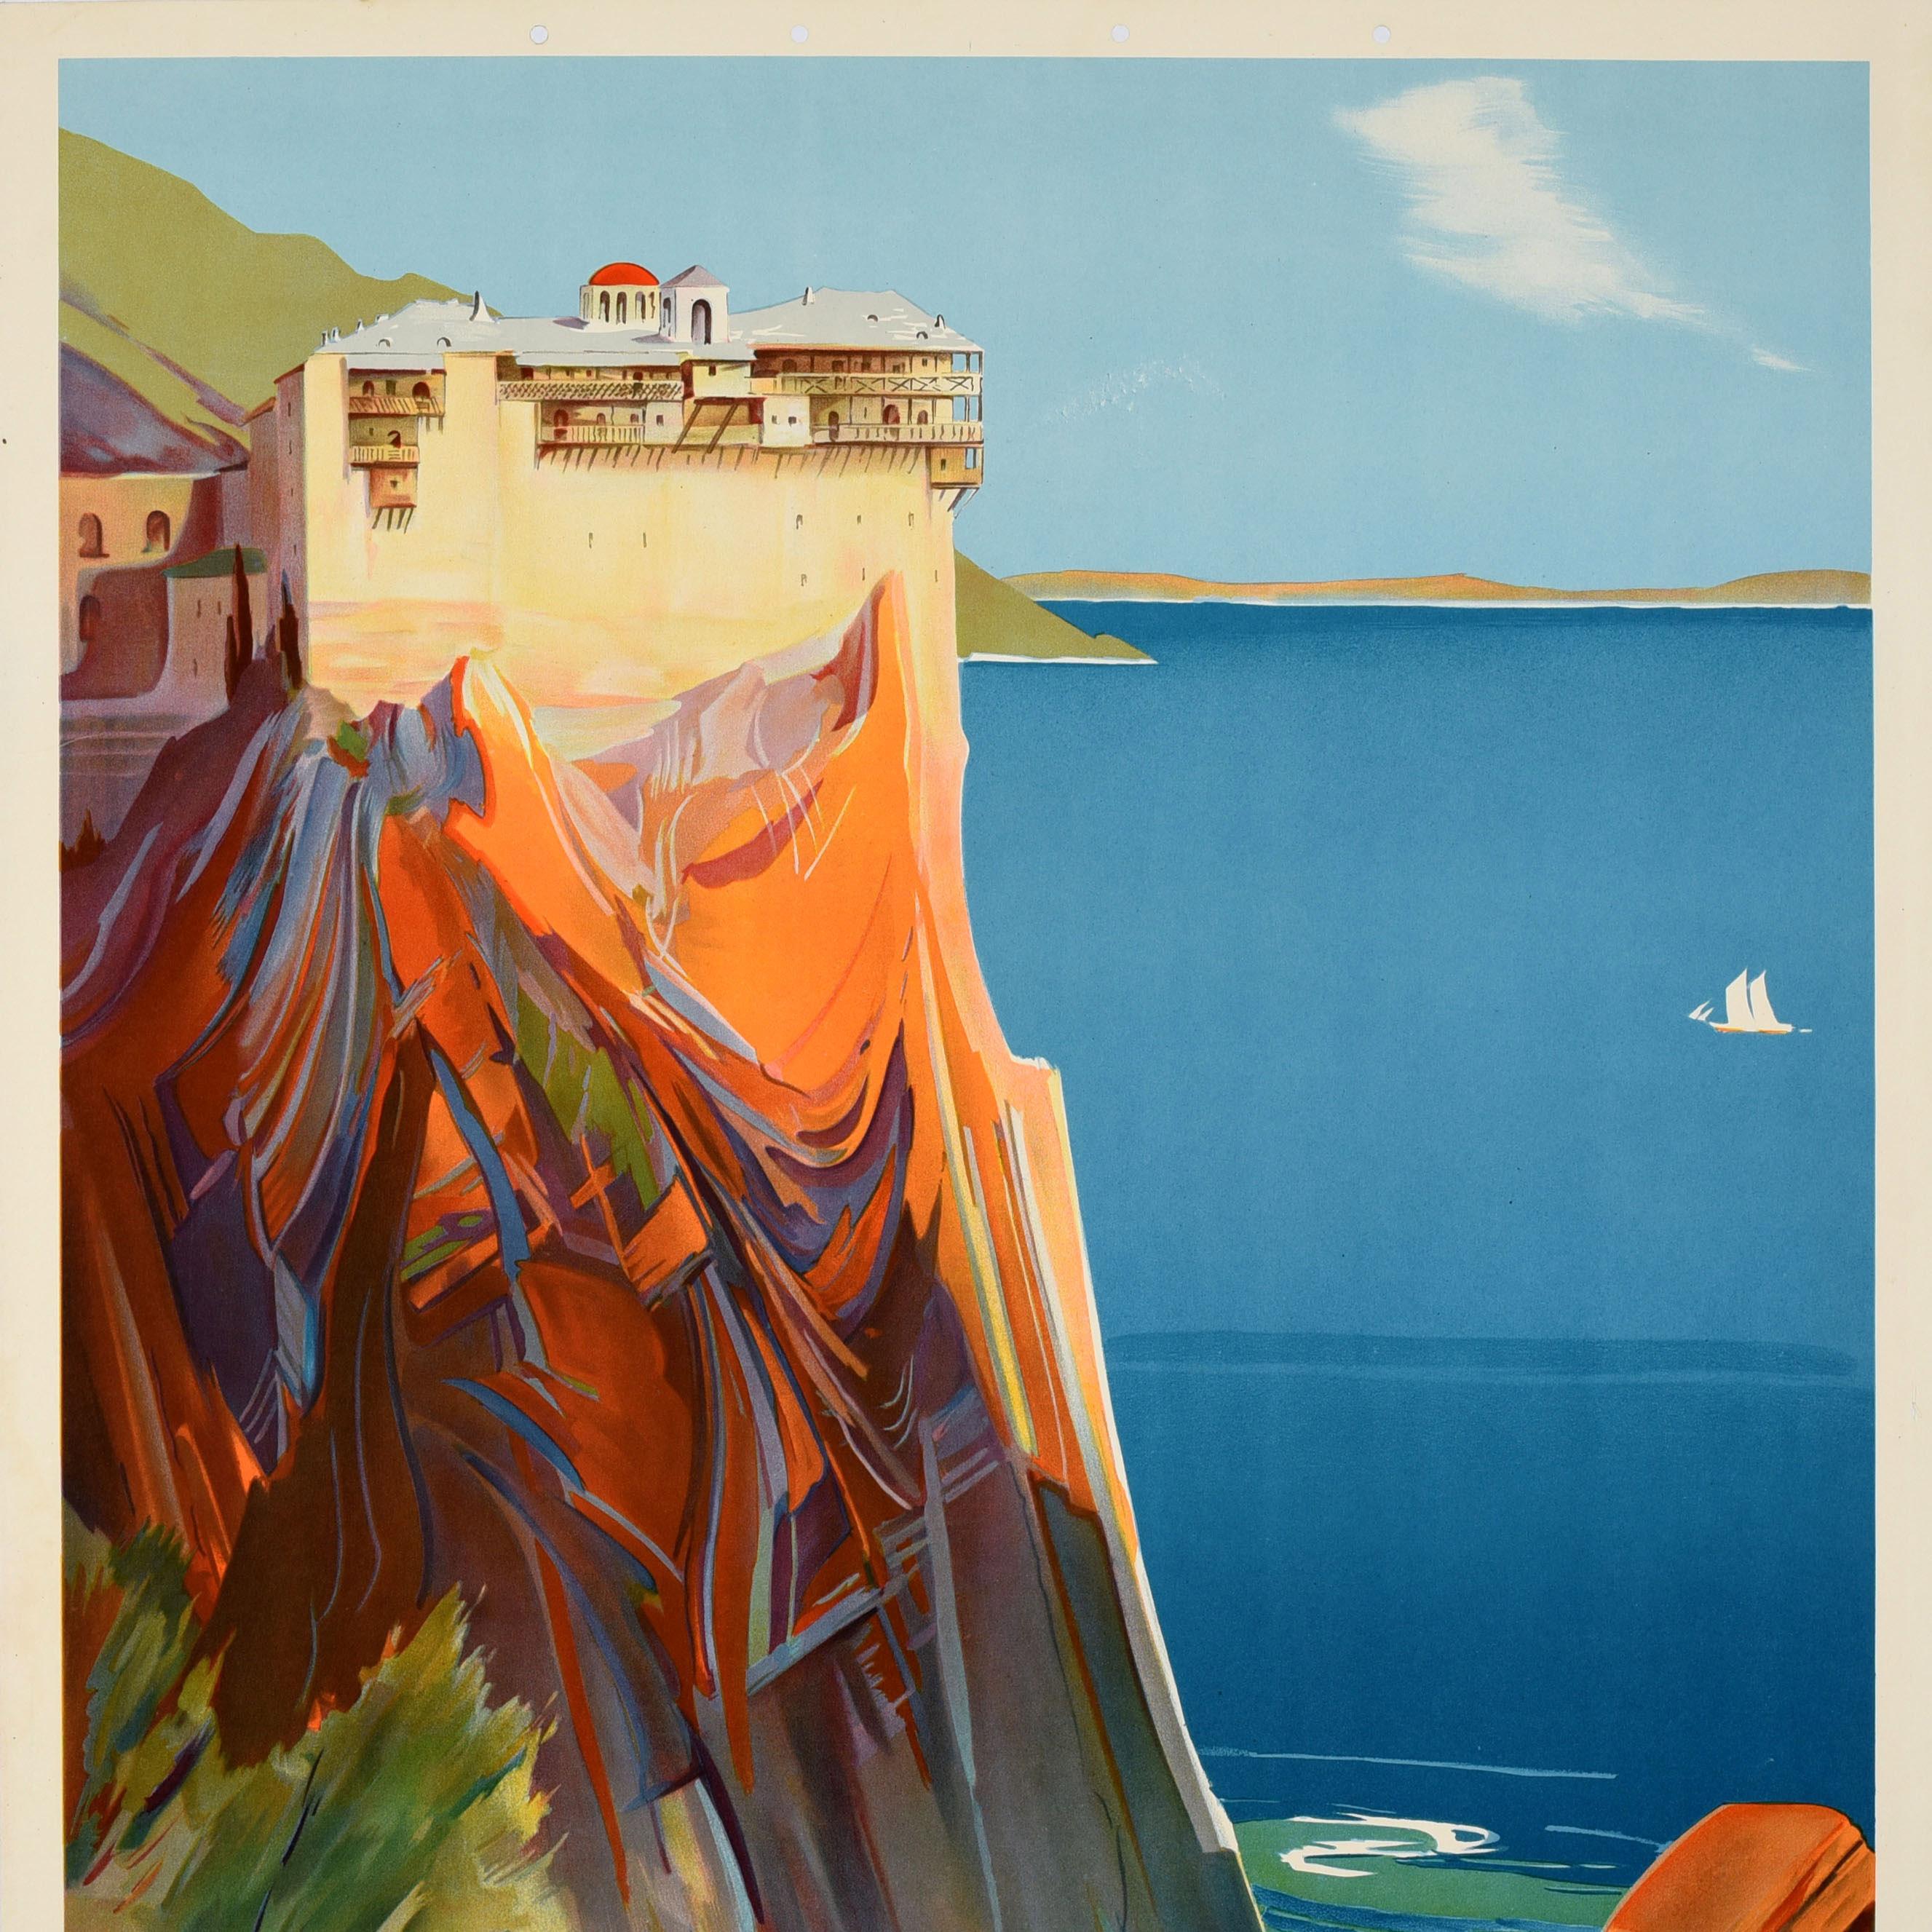 Original vintage travel poster for Mont Athos Grece / Mount Athos Greece featuring a scenic view of the historic 13th century Simonopetra Monastery (Monastery of Simonos Petra / Simon's Rock) on the cliff lit up by the sun with a seagull flying